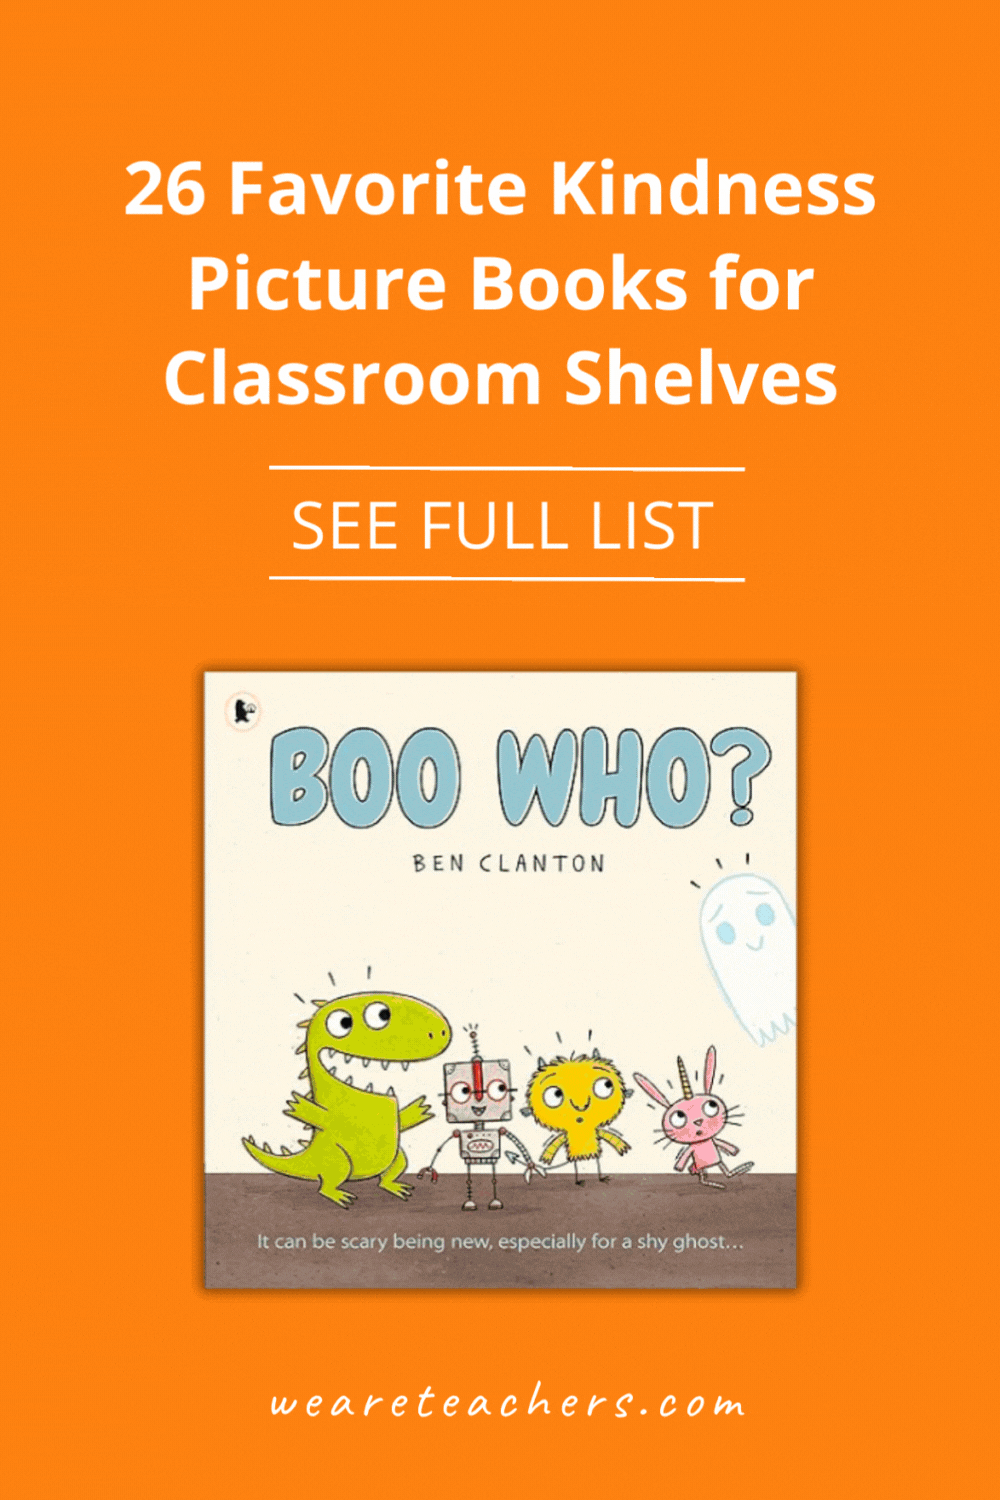 These kindness books tell relatable stories that will get kids thinking and talking about the many ways to be kind.